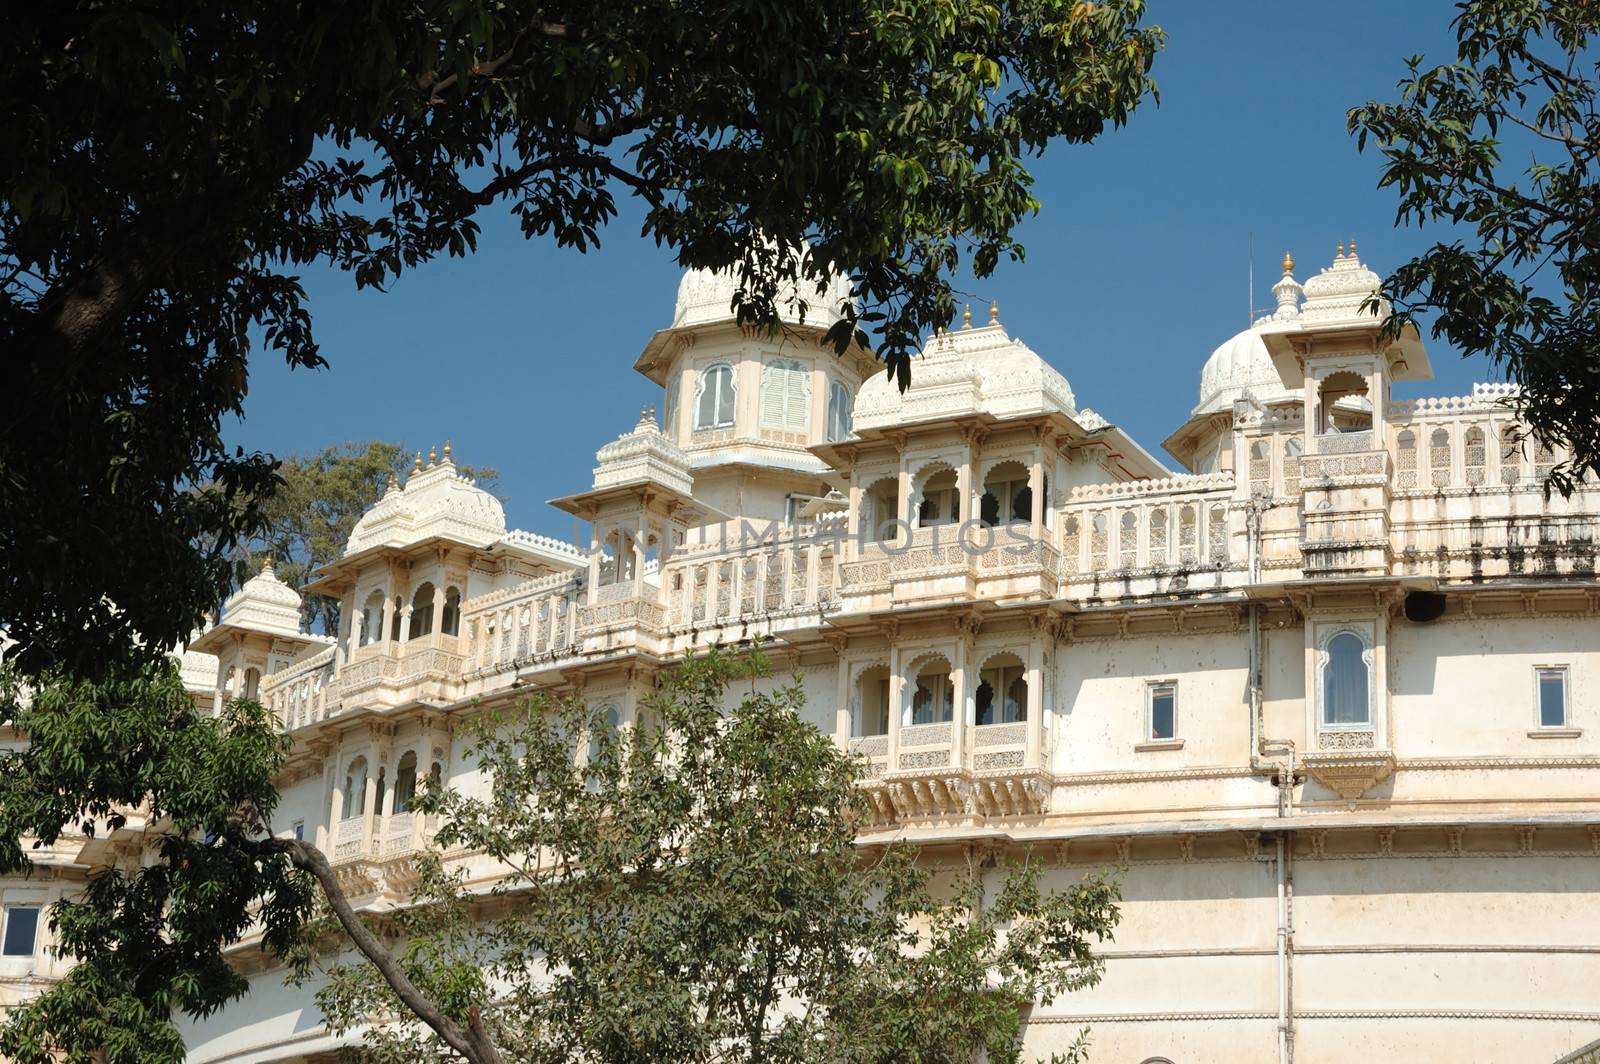 City palace,complex in Udaipur,Rajasthan,India